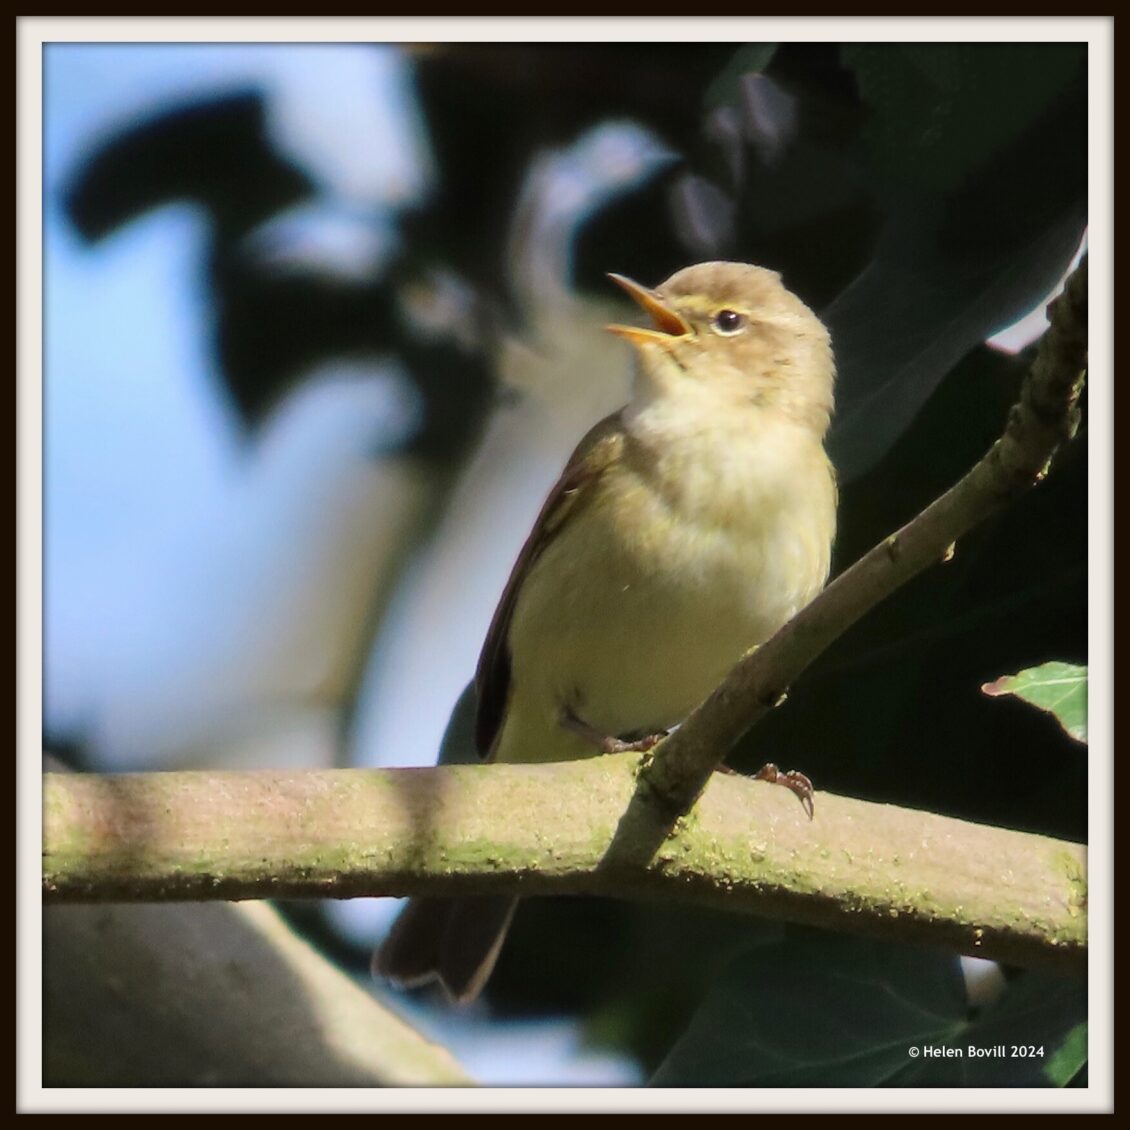 A chiffchaff singing high in a tree in the cemetery